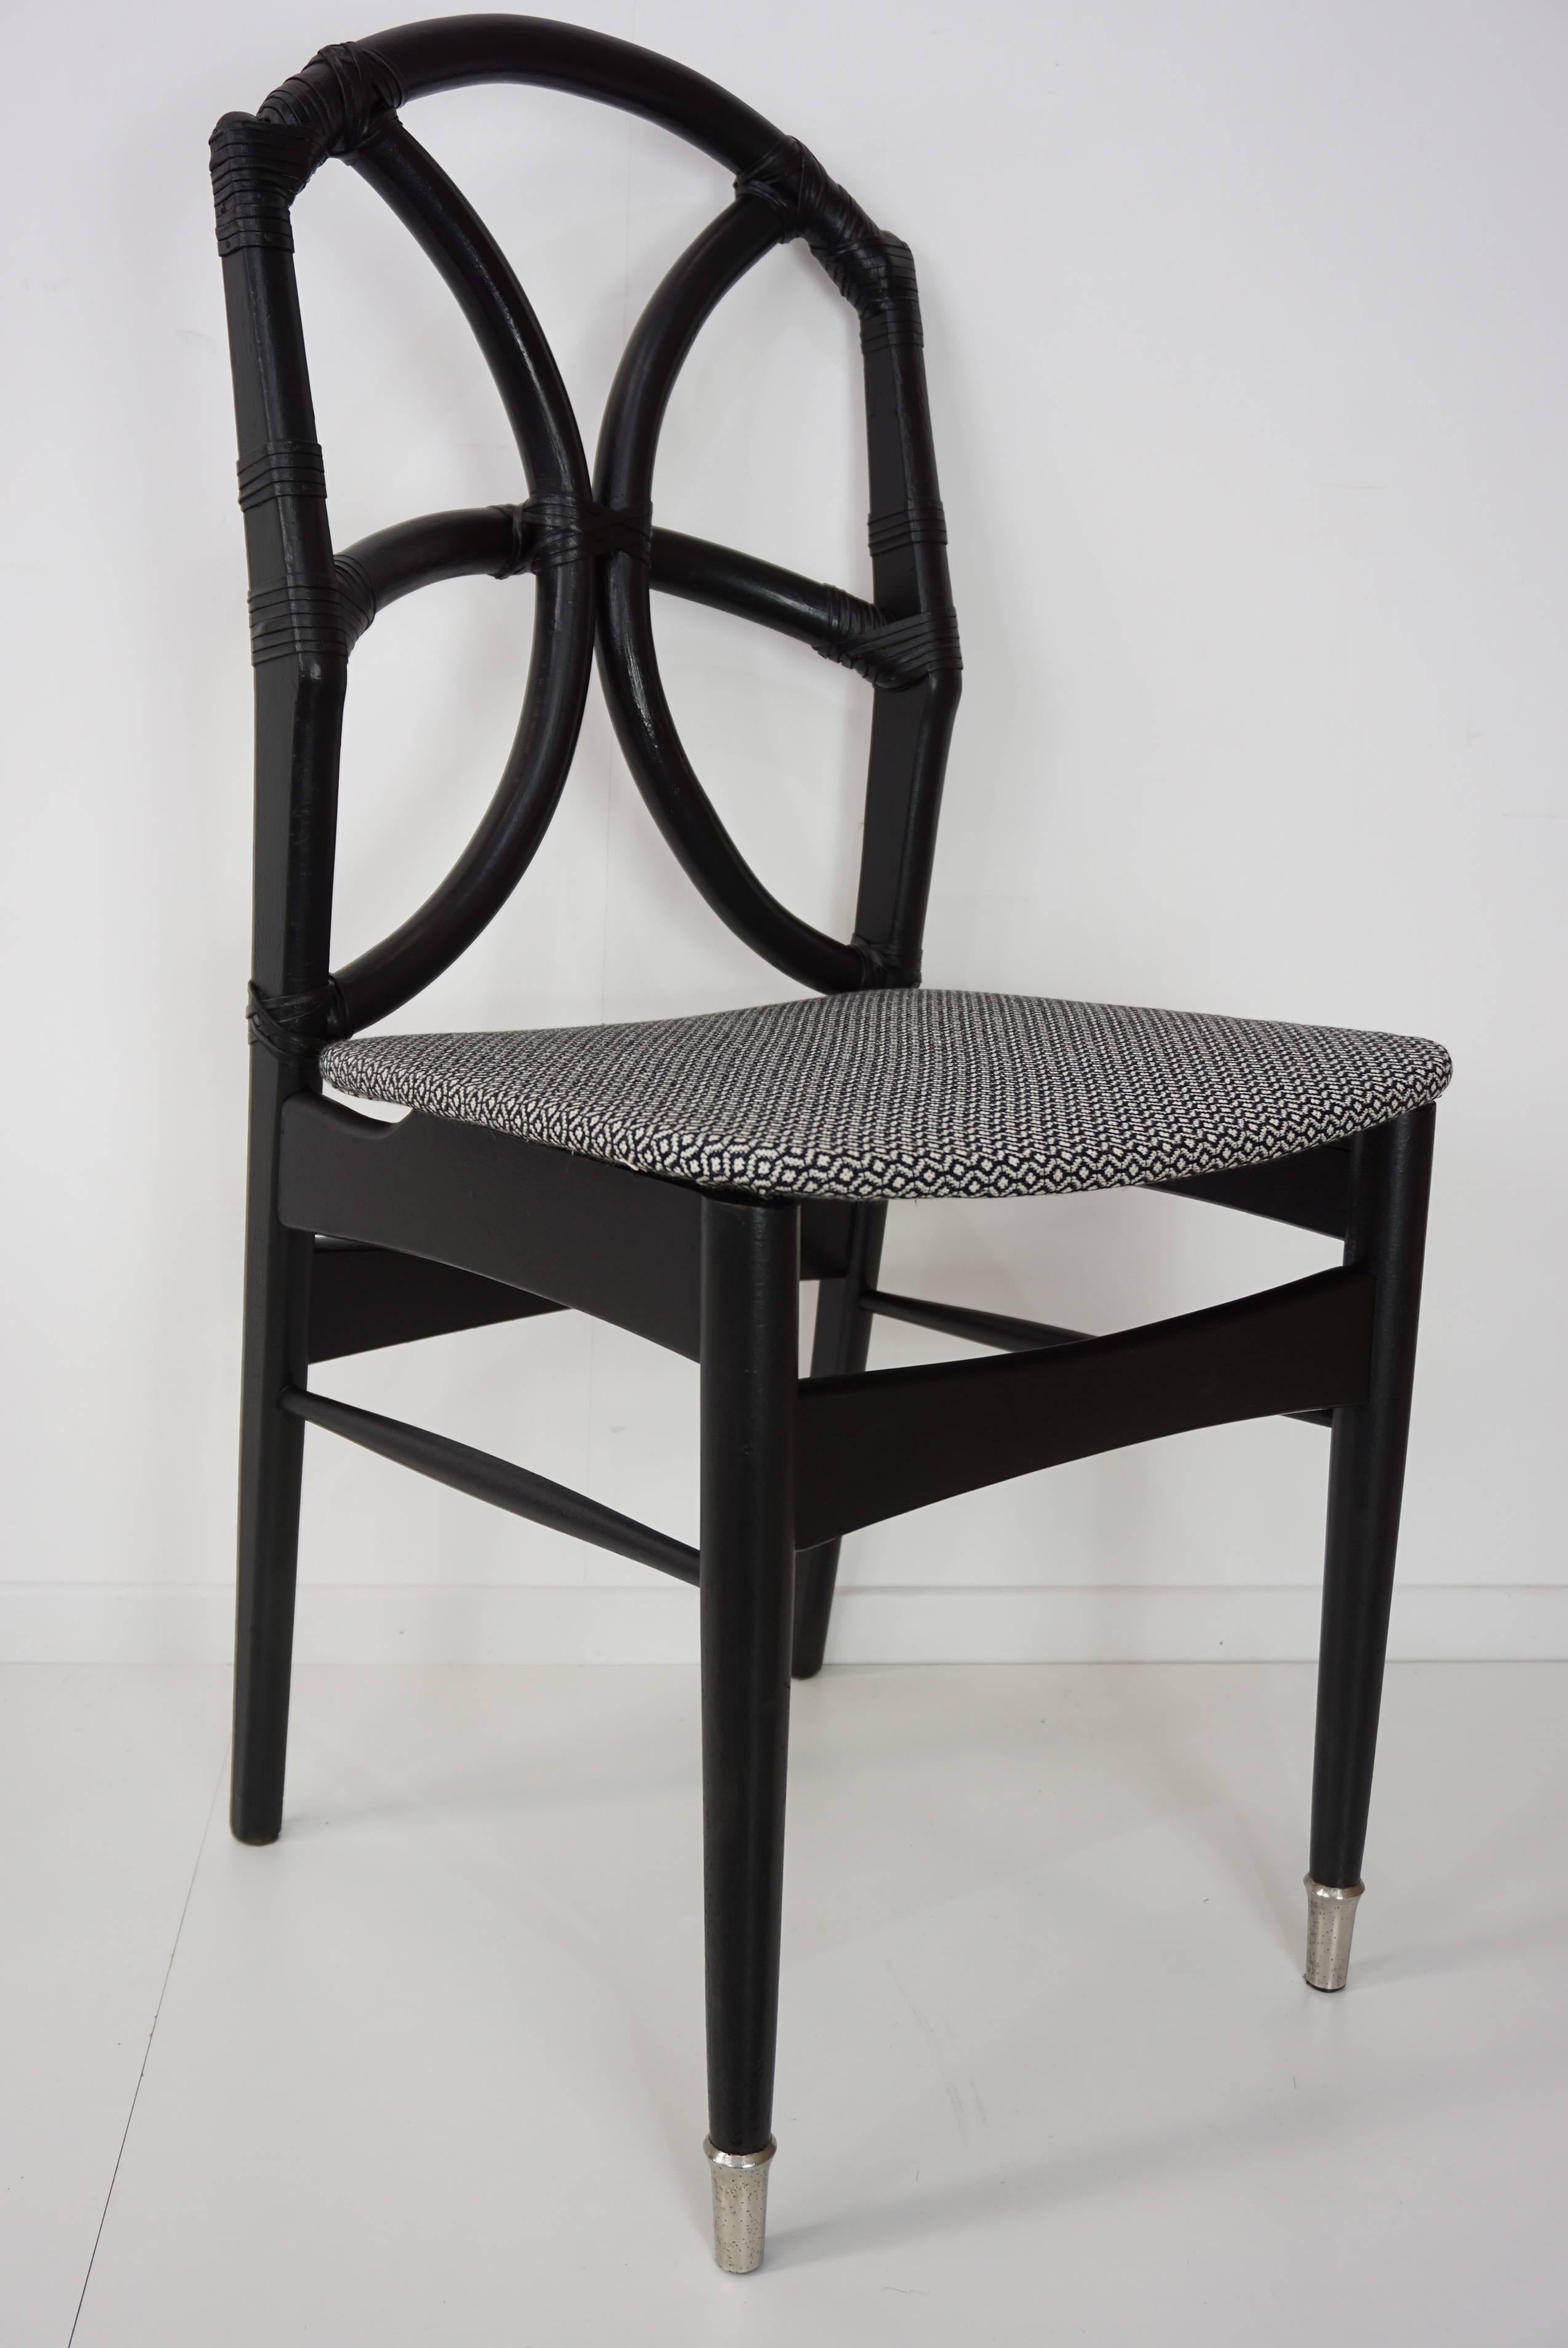 20th Century Set of Four Black Wooden Rattan Fabric and Leather Chairs Design, 1950s